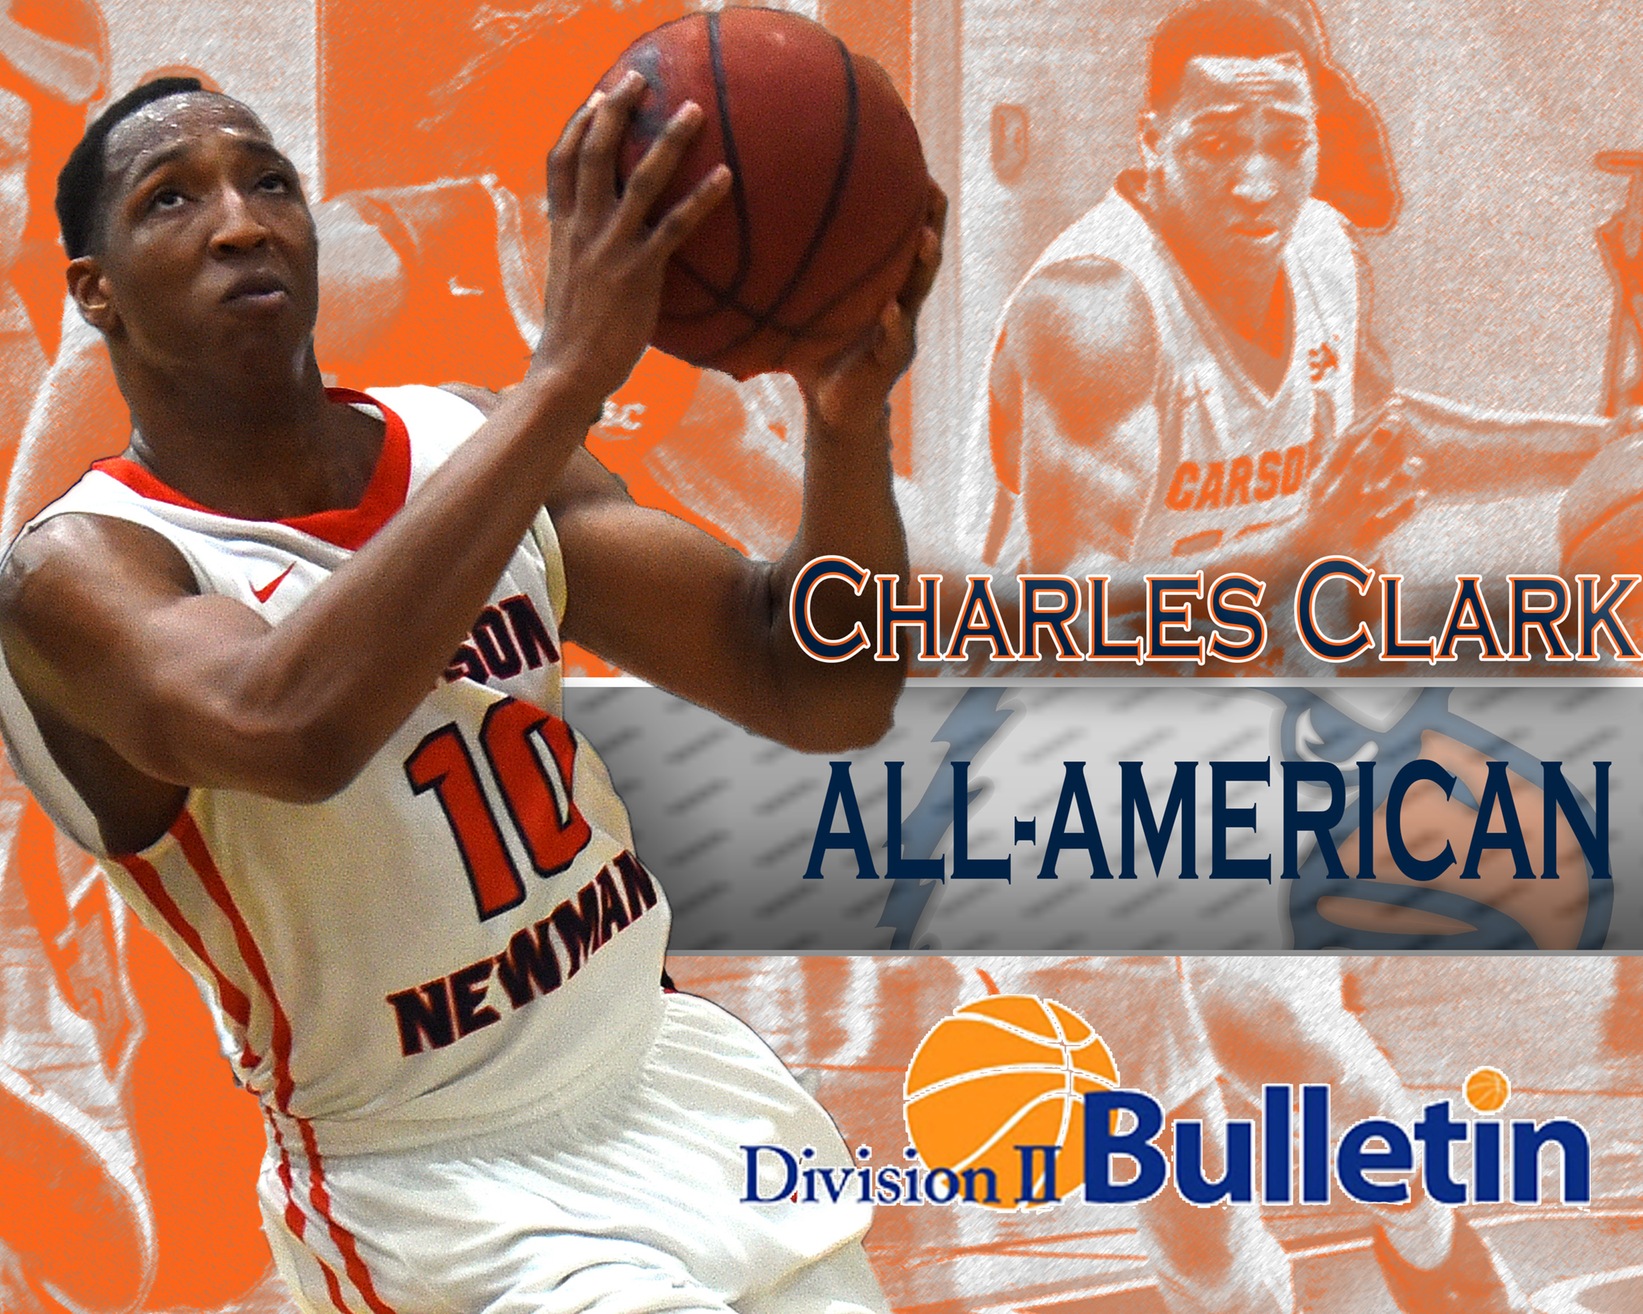 Clark grabs All-America honor from Division II Bulletin